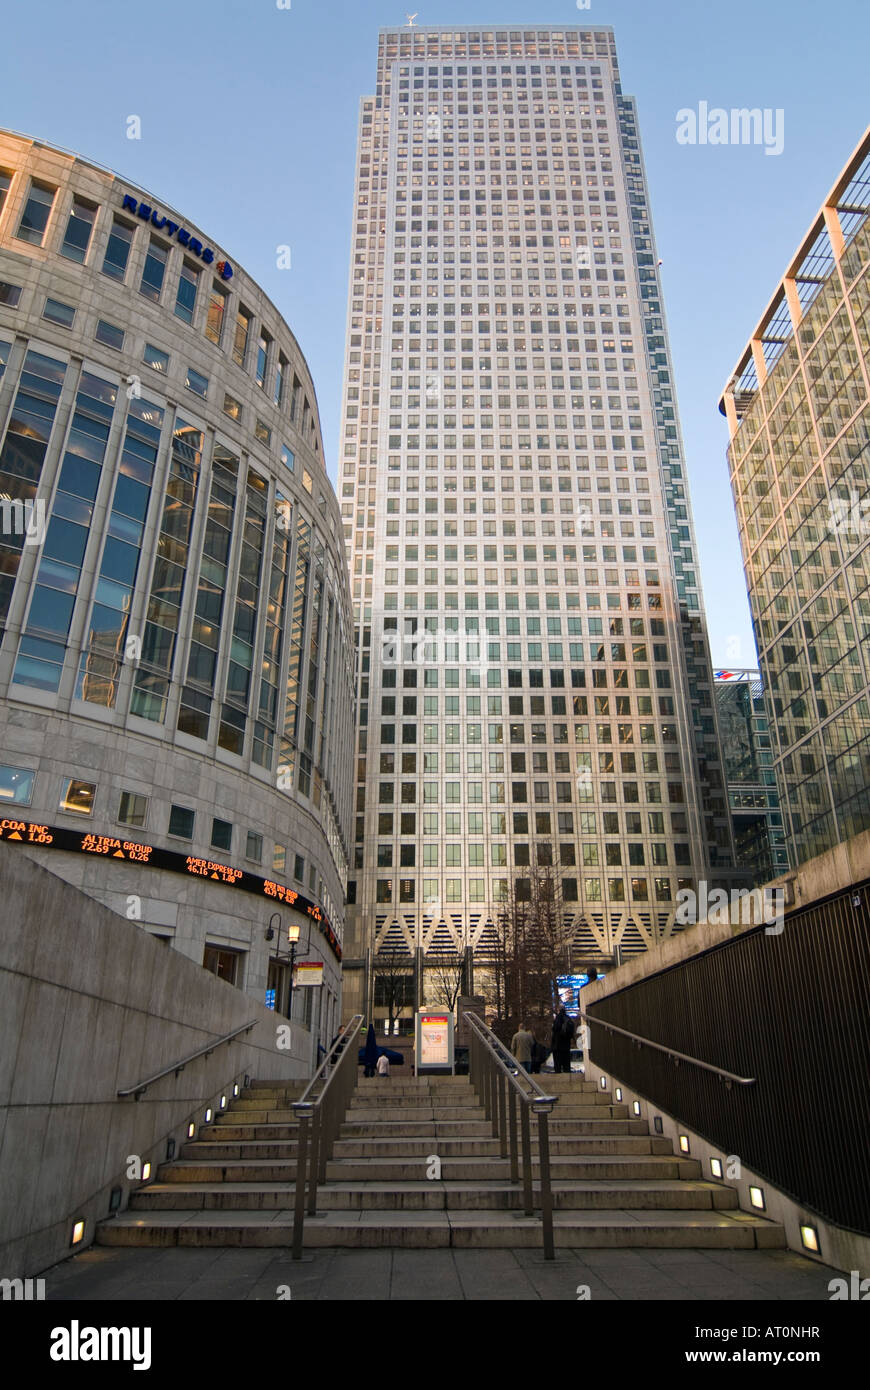 Vertical wide angle of Canary Wharf Tower and the surrounding ...